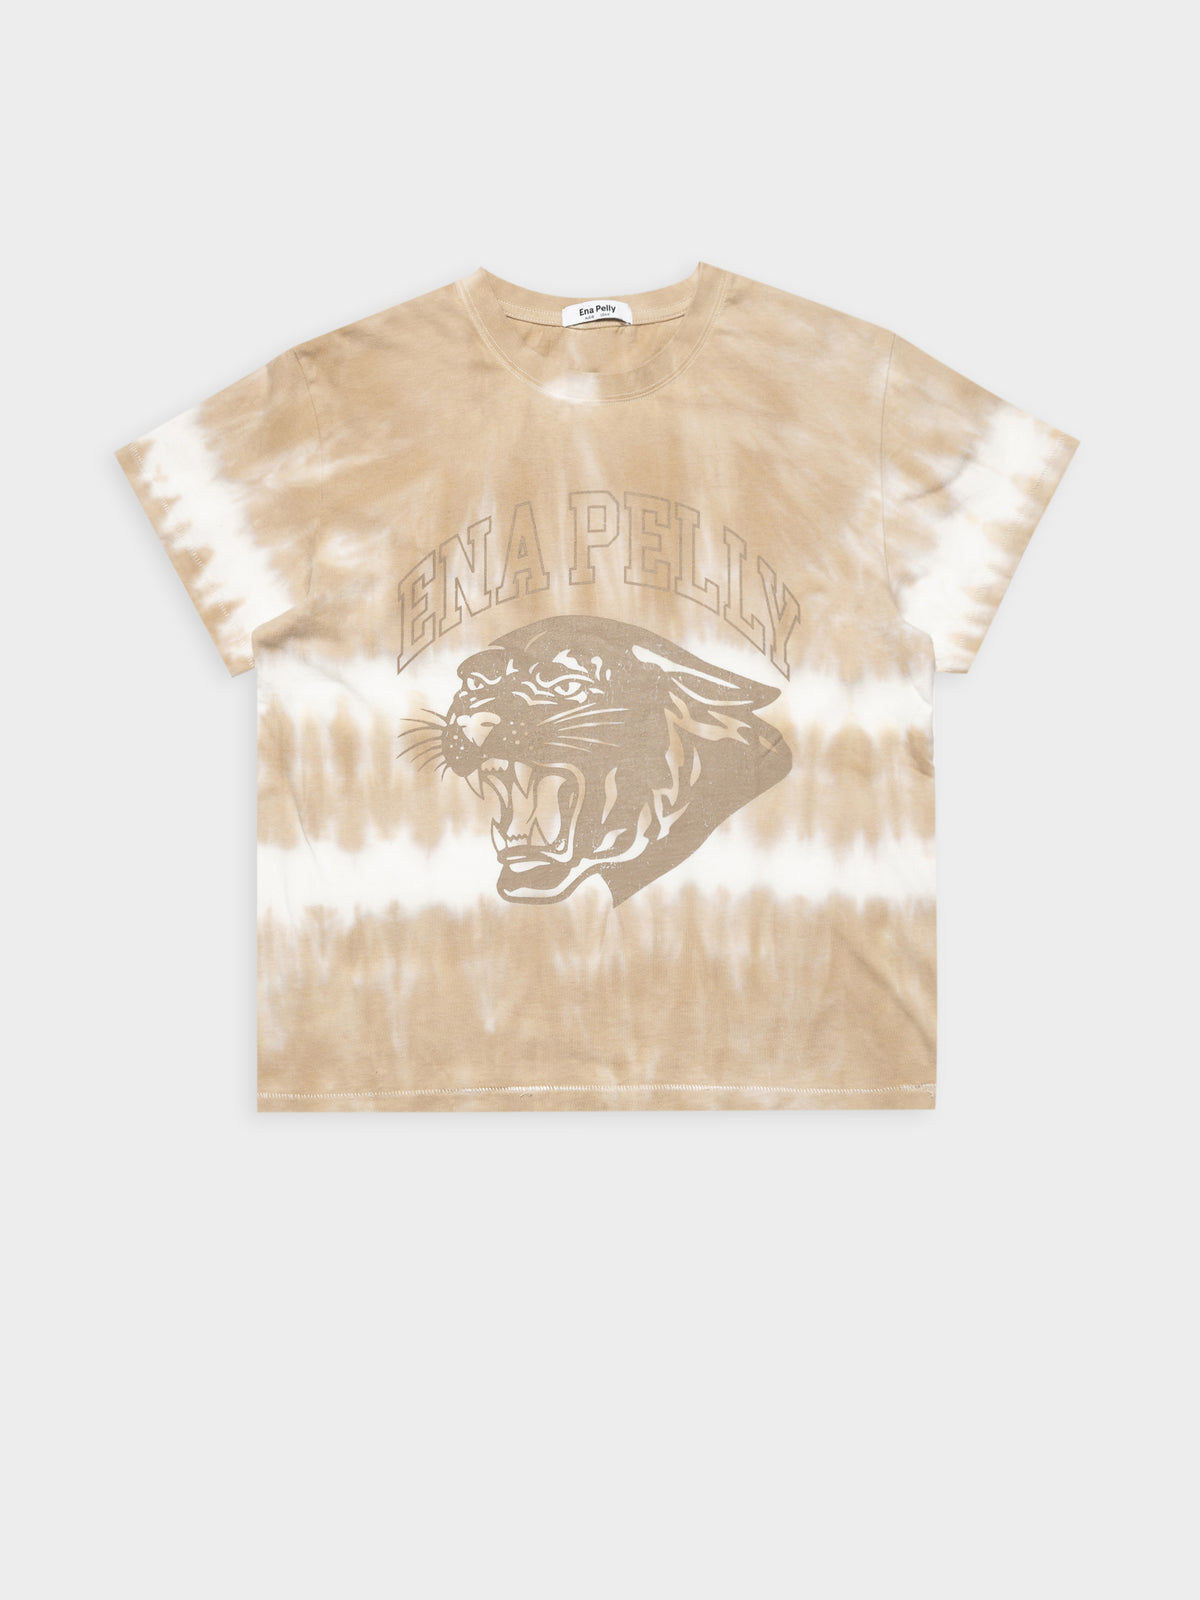 Panther Collegiate T-Shirt in Ginger Tie Dye